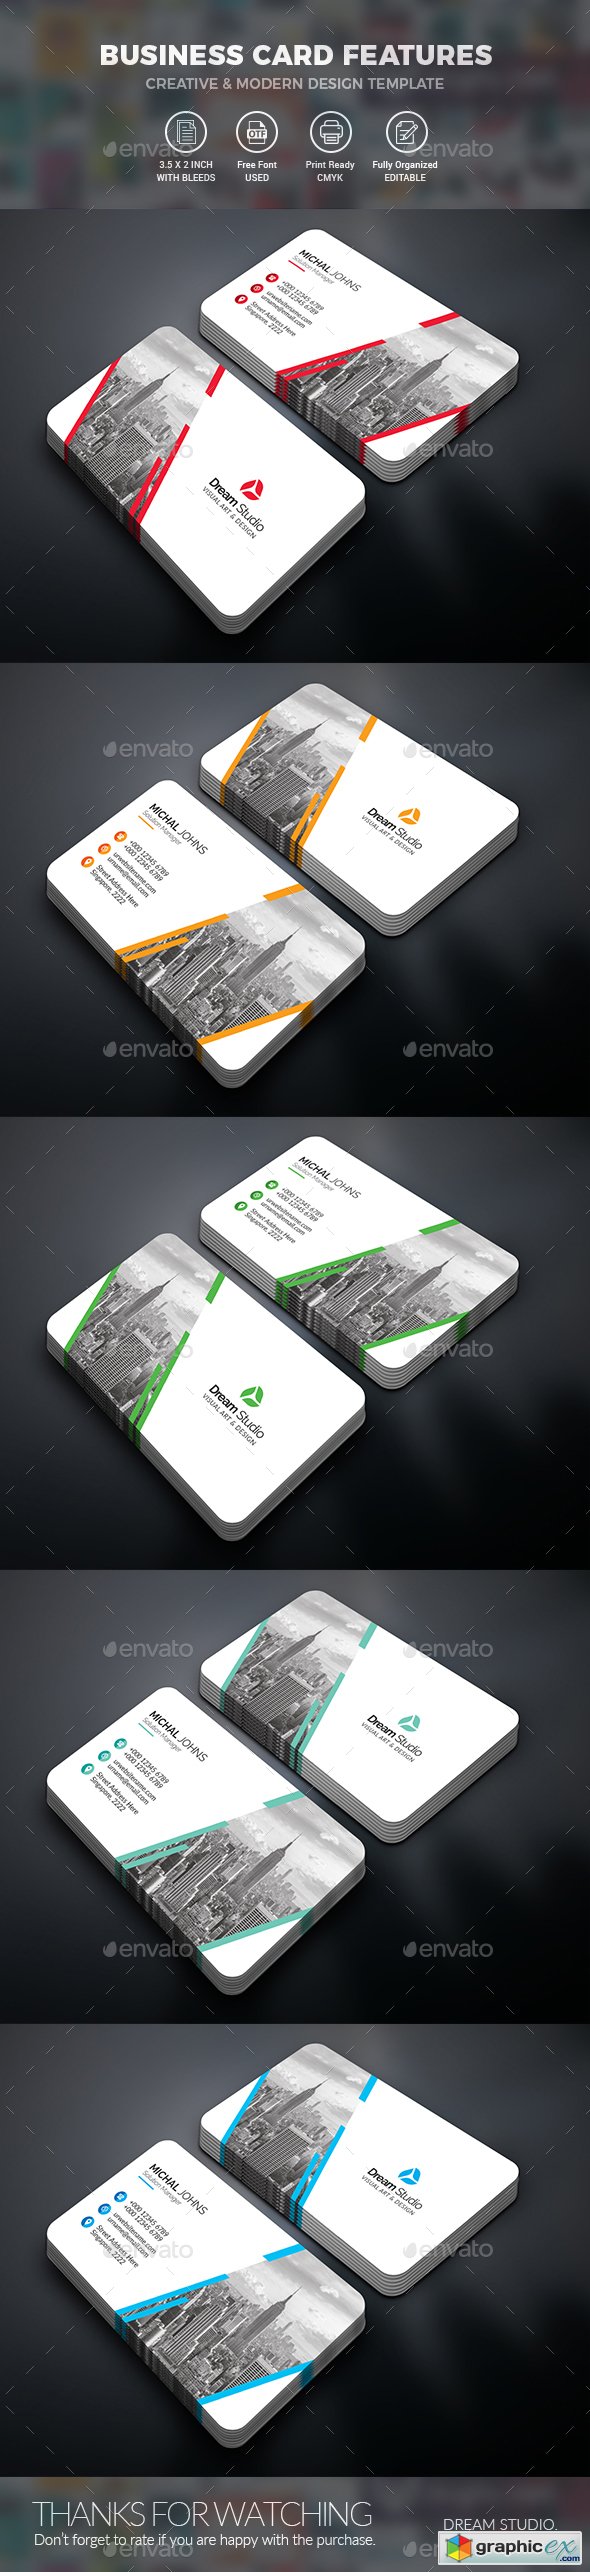 Business Cards 20440767